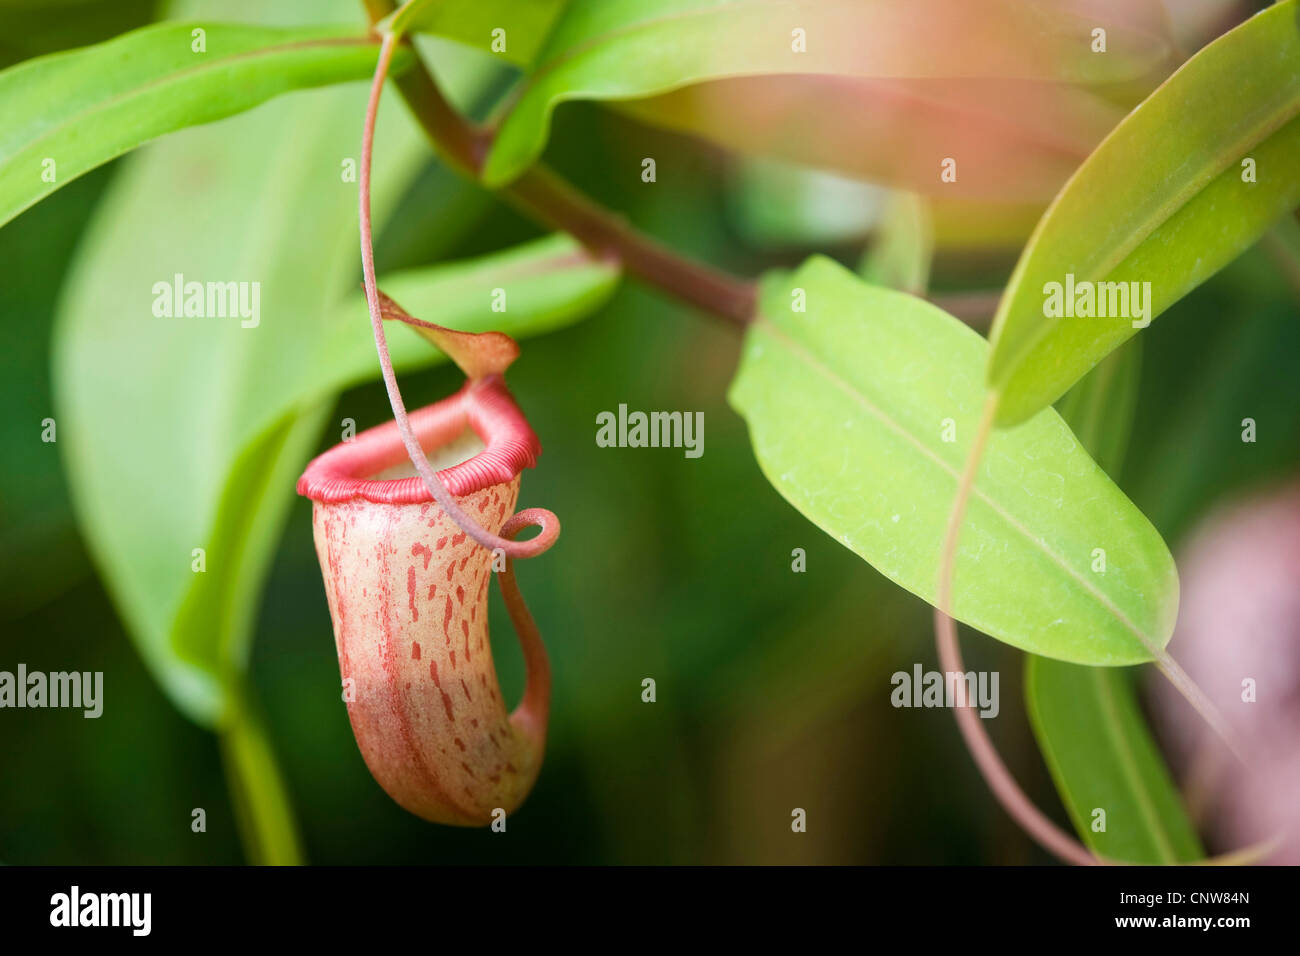 pitcher plant (Nepenthes alata), transformed leaf for catching insects, Malaysia Stock Photo